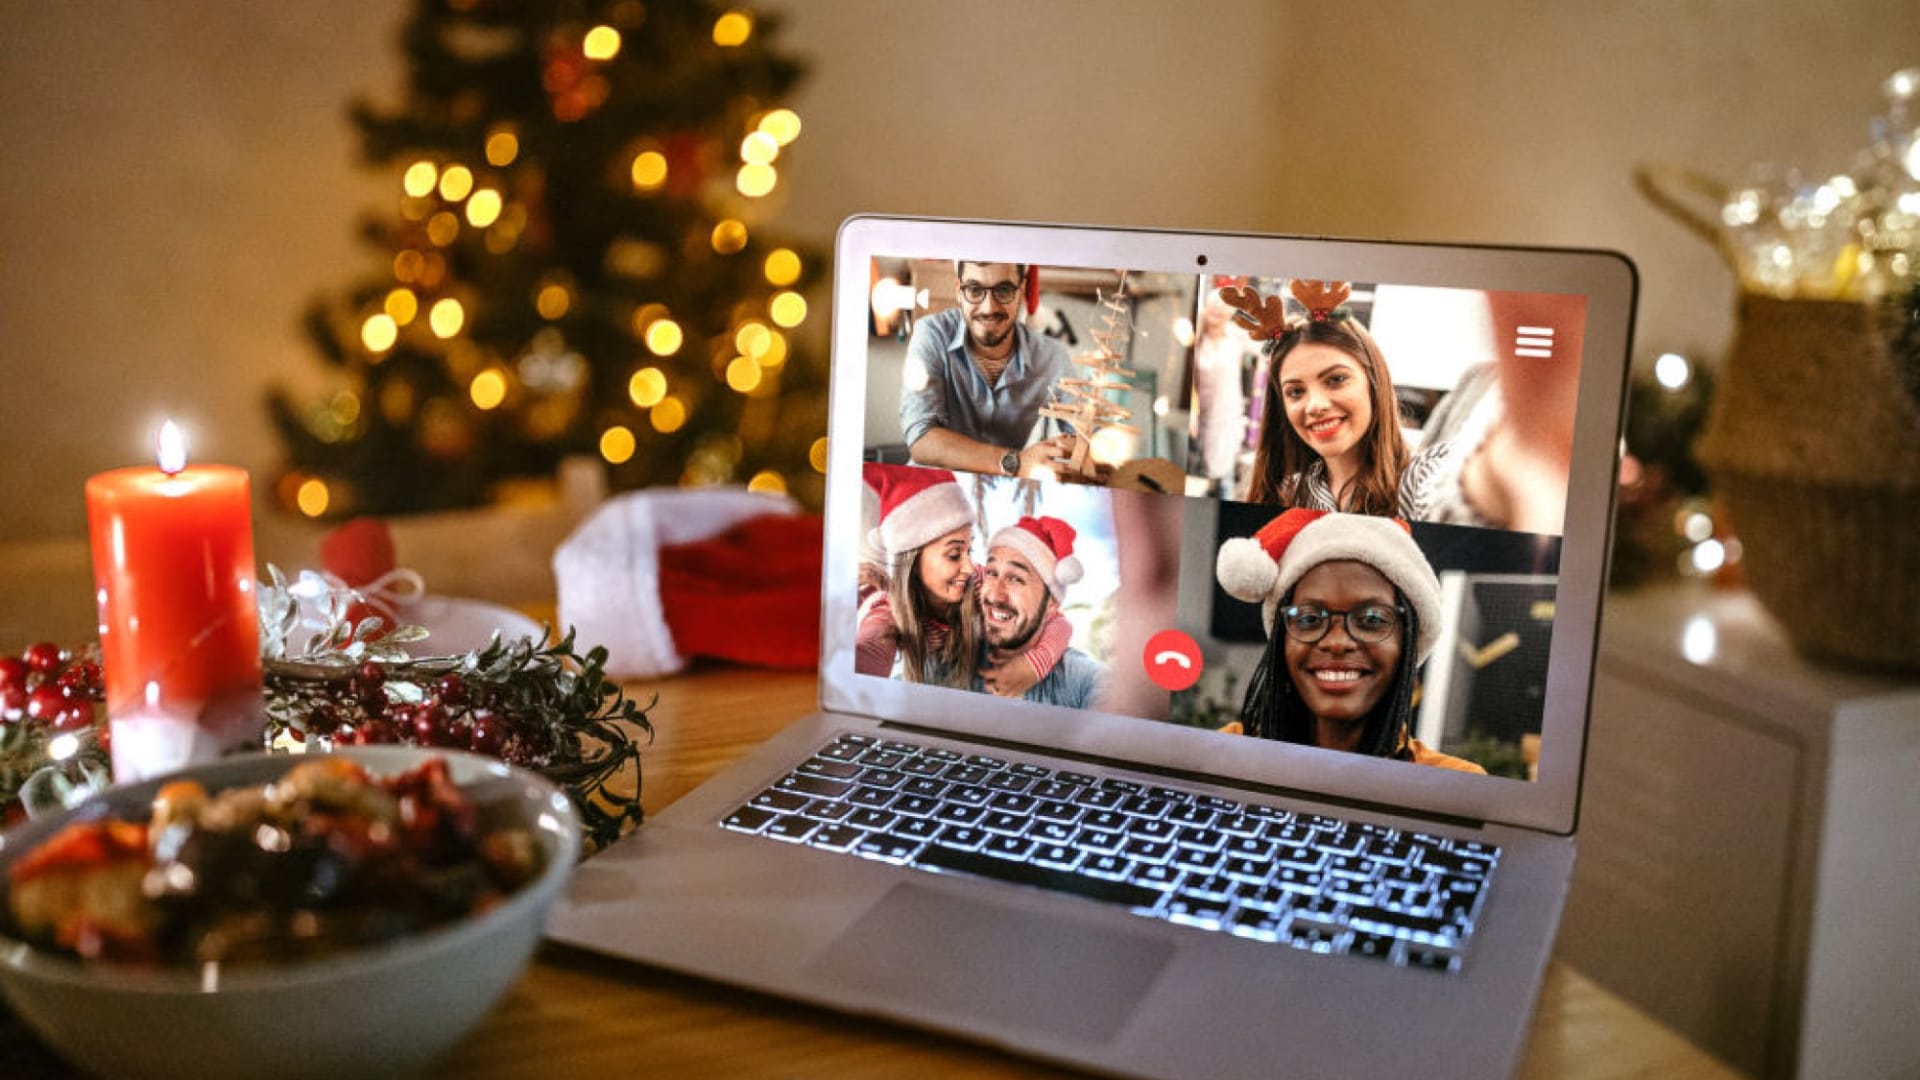 5 Creative Ways to Host an Amazing Office Holiday Party on Zoom